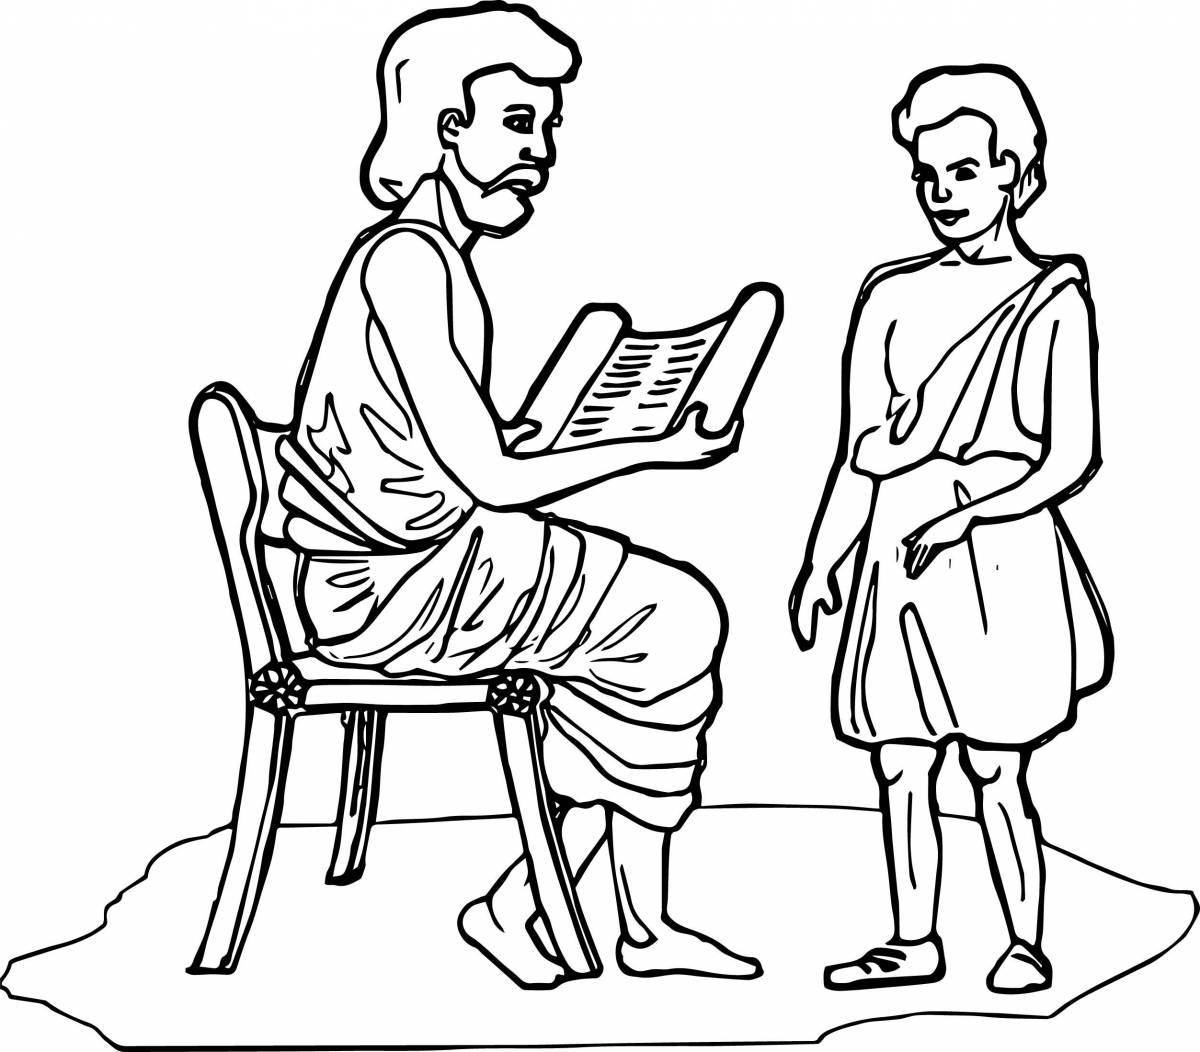 Incredible ancient greece coloring book for kids